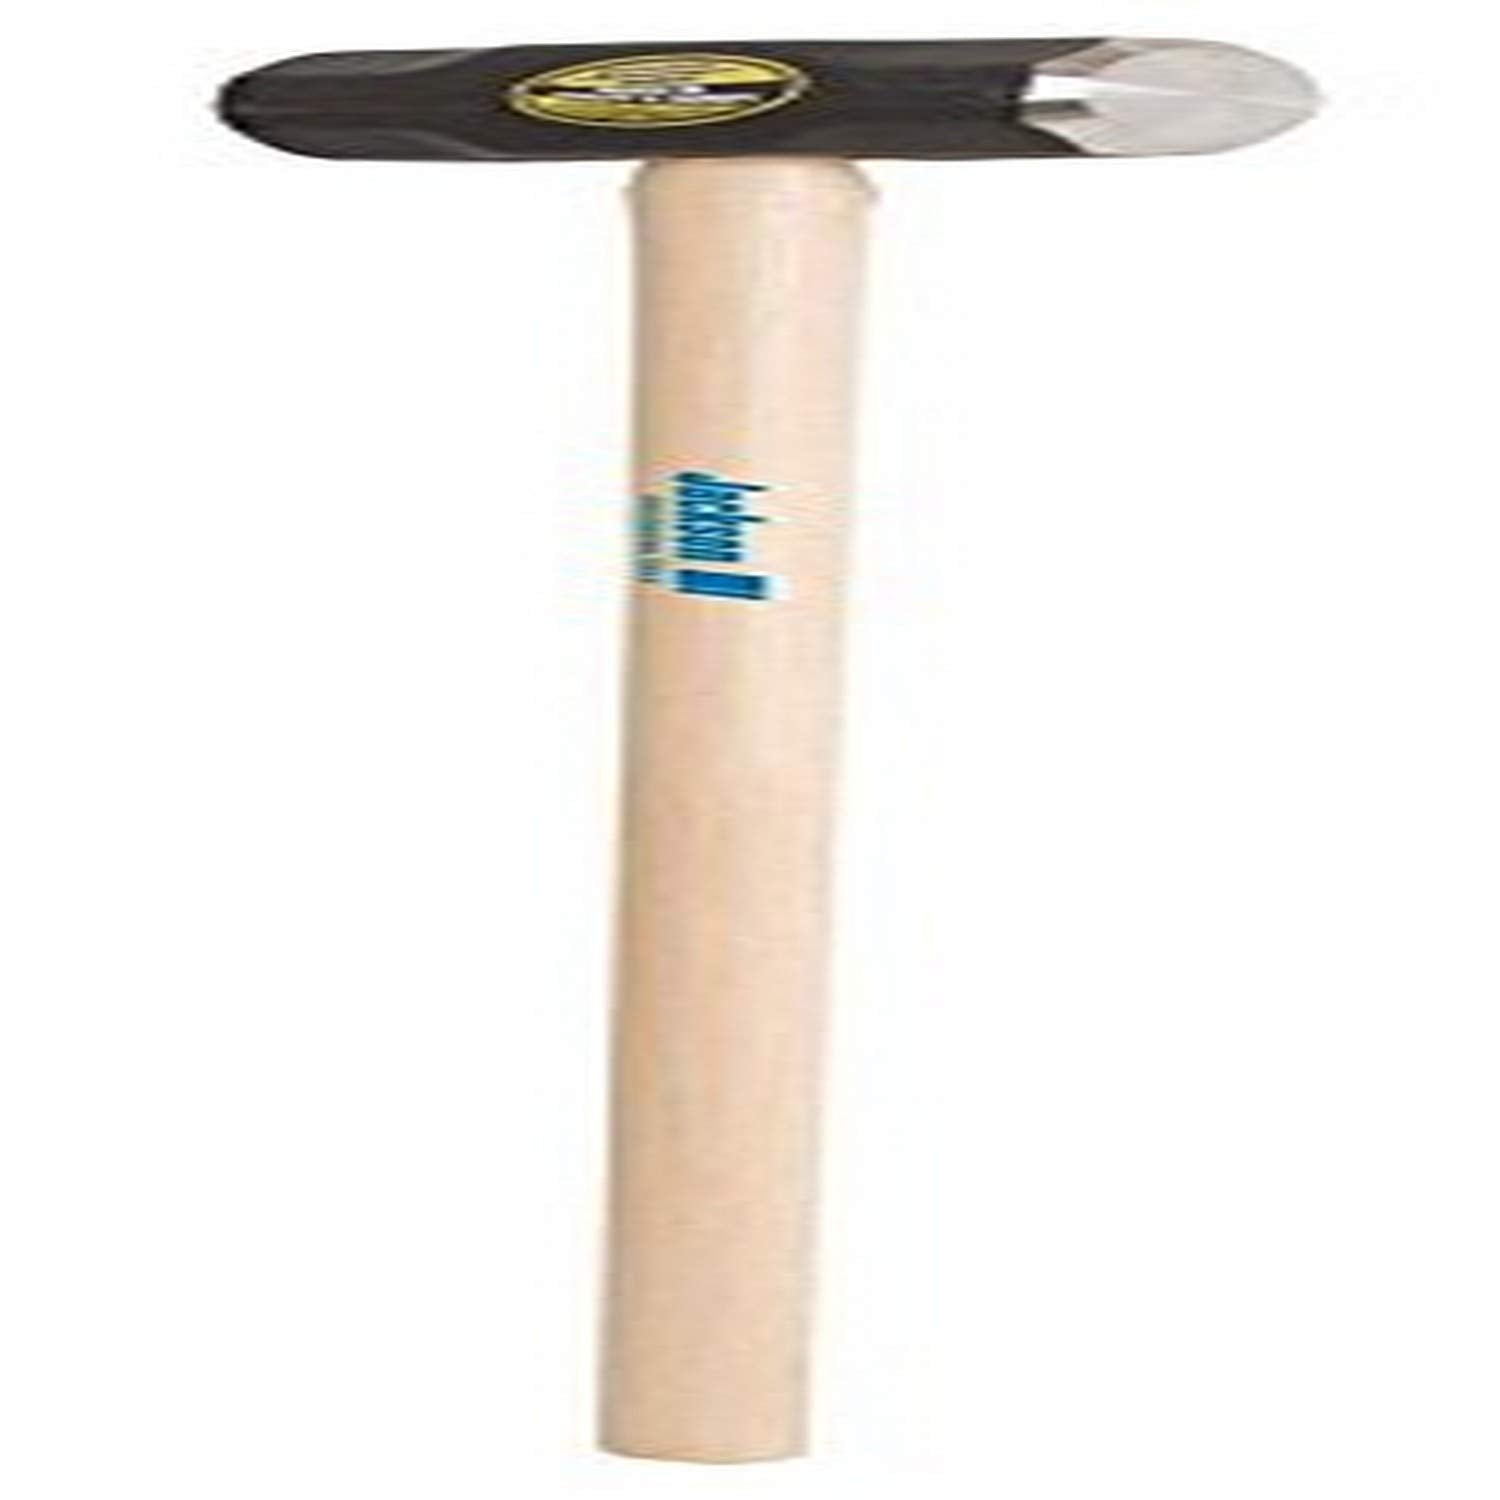 Jackson 1199400 12-Pound Double Faced Sledge Hammer with 36-Inch Hickory Handle